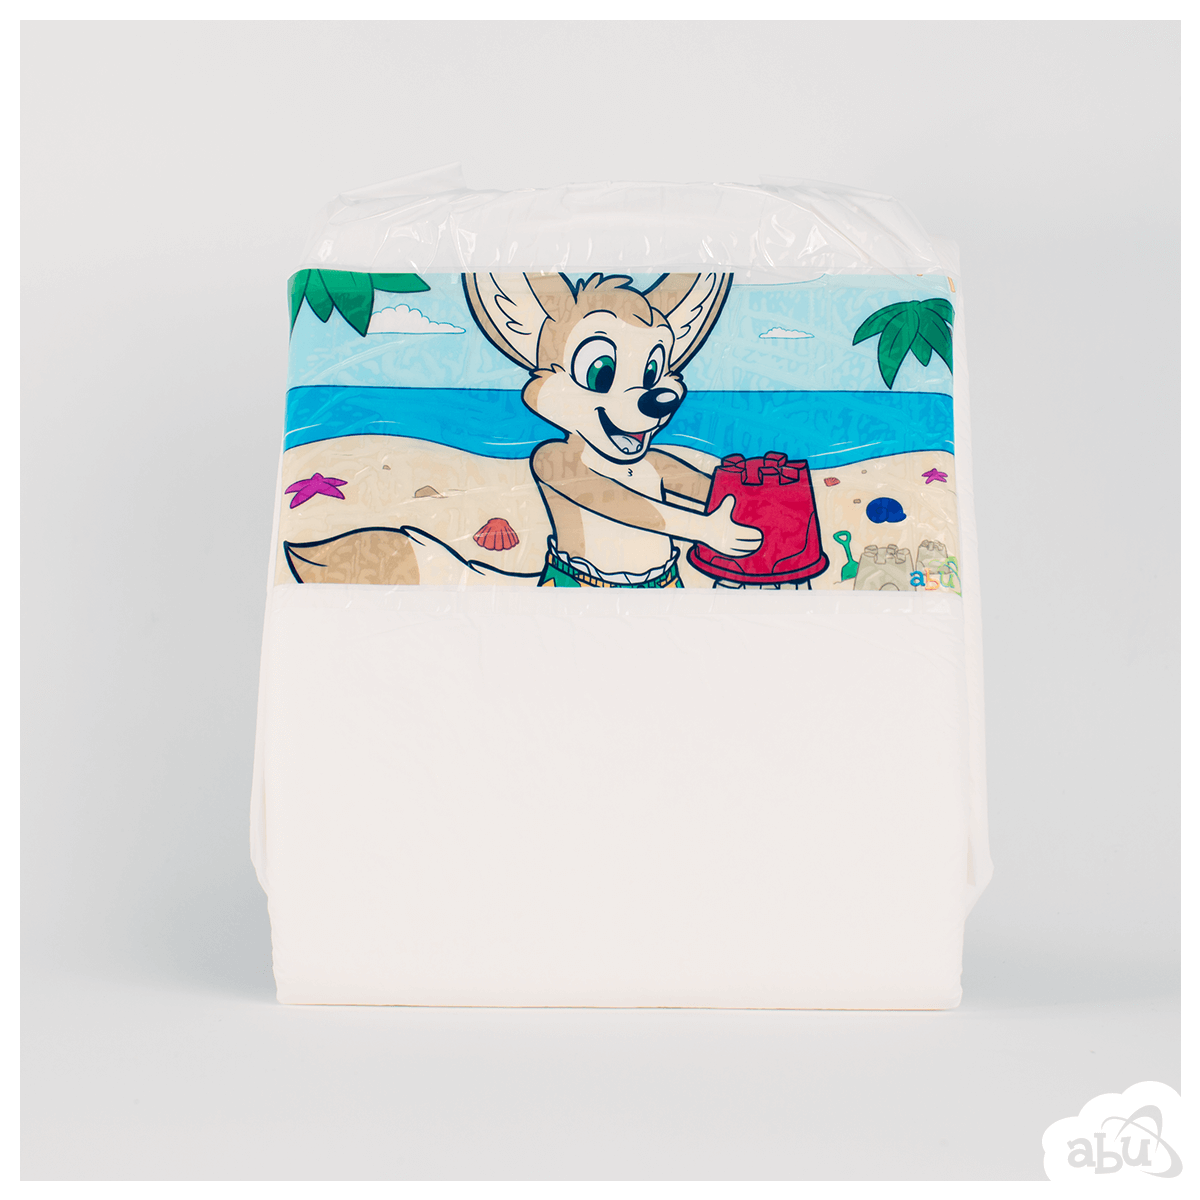 Fennec on the Beach - ABUniverse Europe